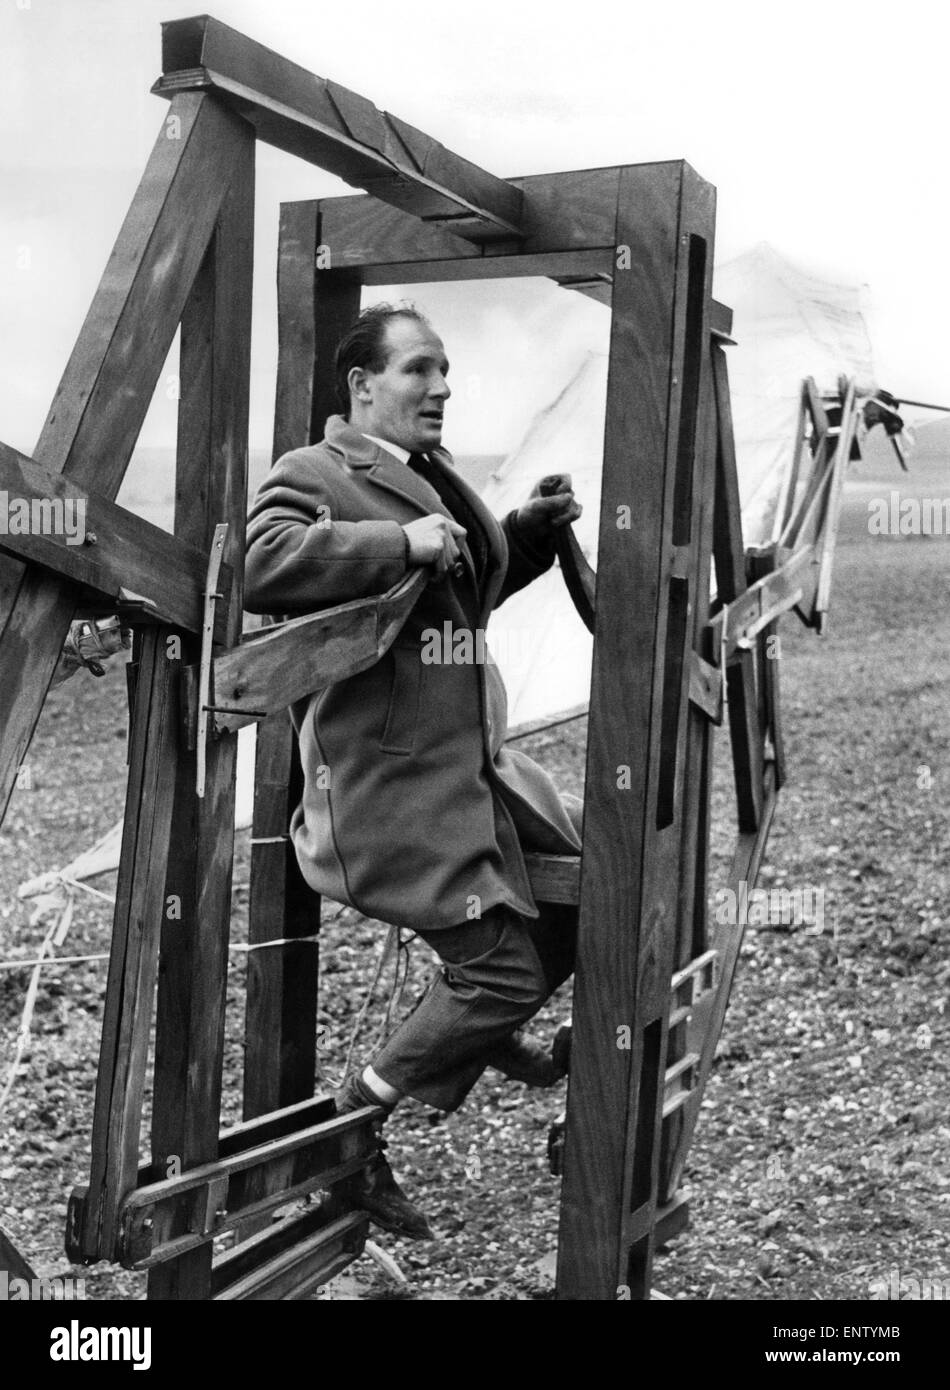 He Tried to Fly: 36 year old Mike Dolling of Queens Drive, Park South, Swindon, put his experimental ornithopter through its paces, on the edge of the Marlborough Downs, Wiltshire, but no amount of flap would bring him 'lift off' - engine failure - a weak Mr. Dolling. 16th November 1969 Stock Photo